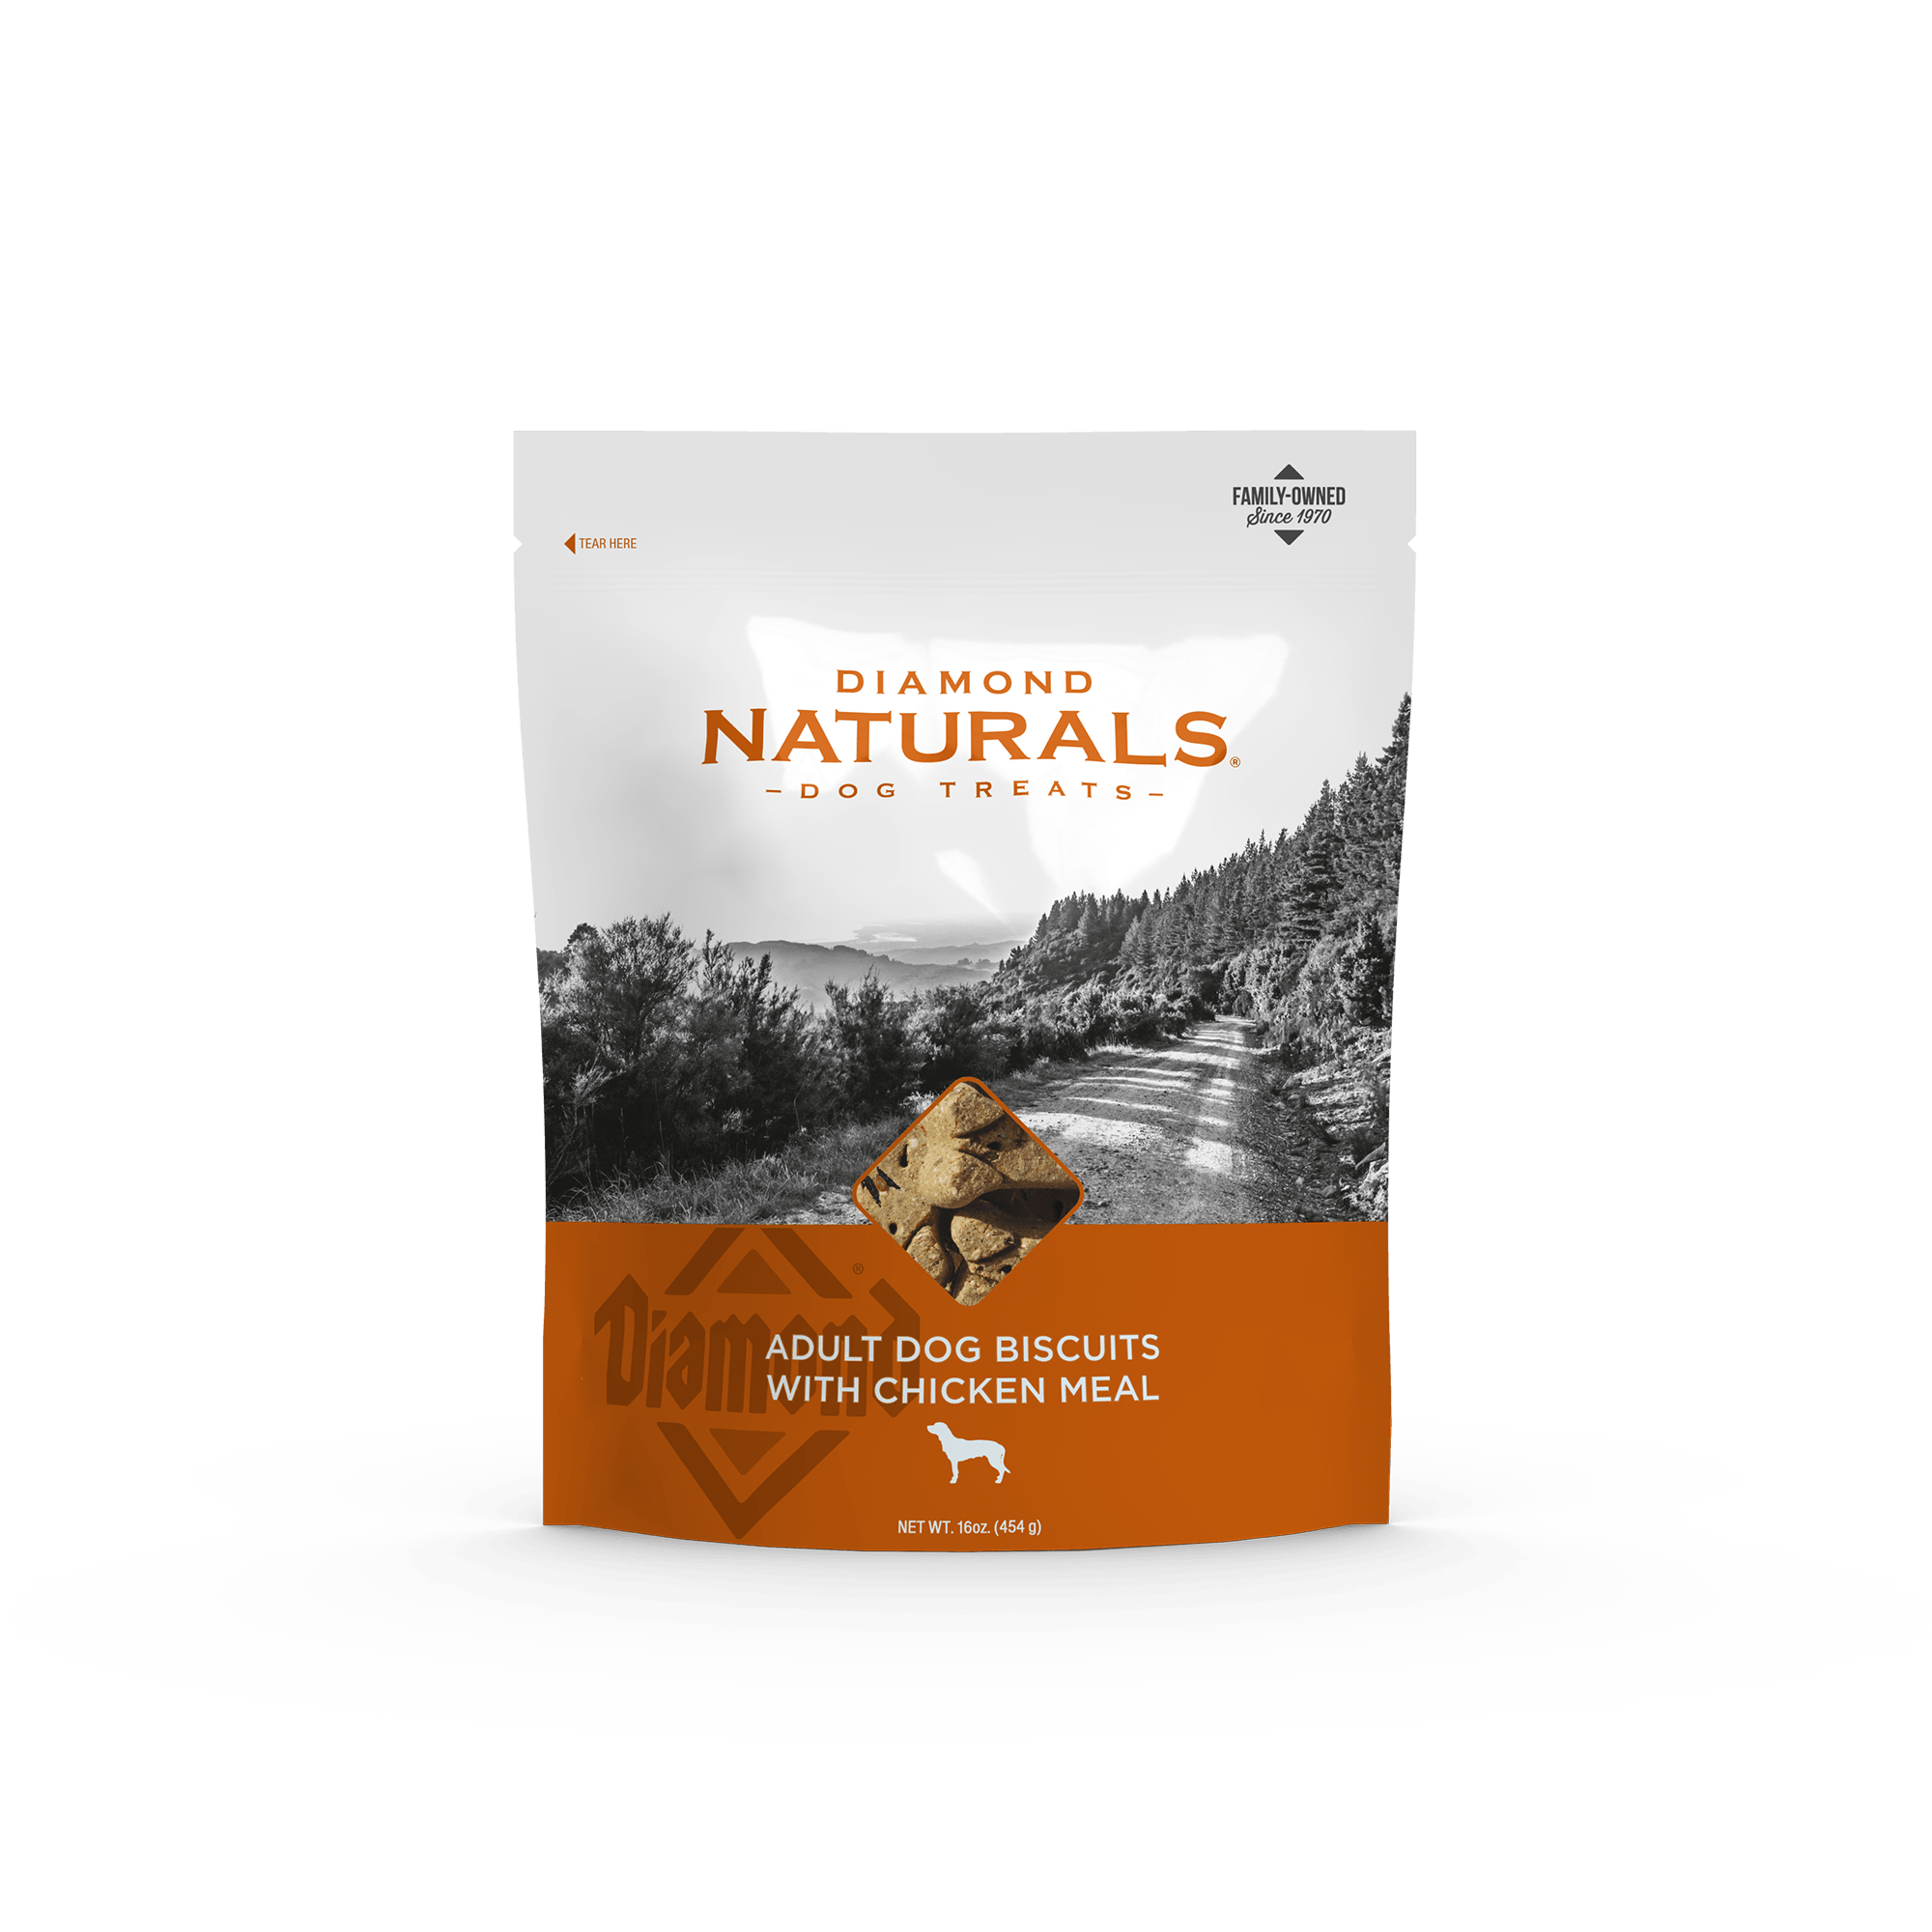 Diamond Naturals Adult Dog Biscuits With Chicken Meal product packaging